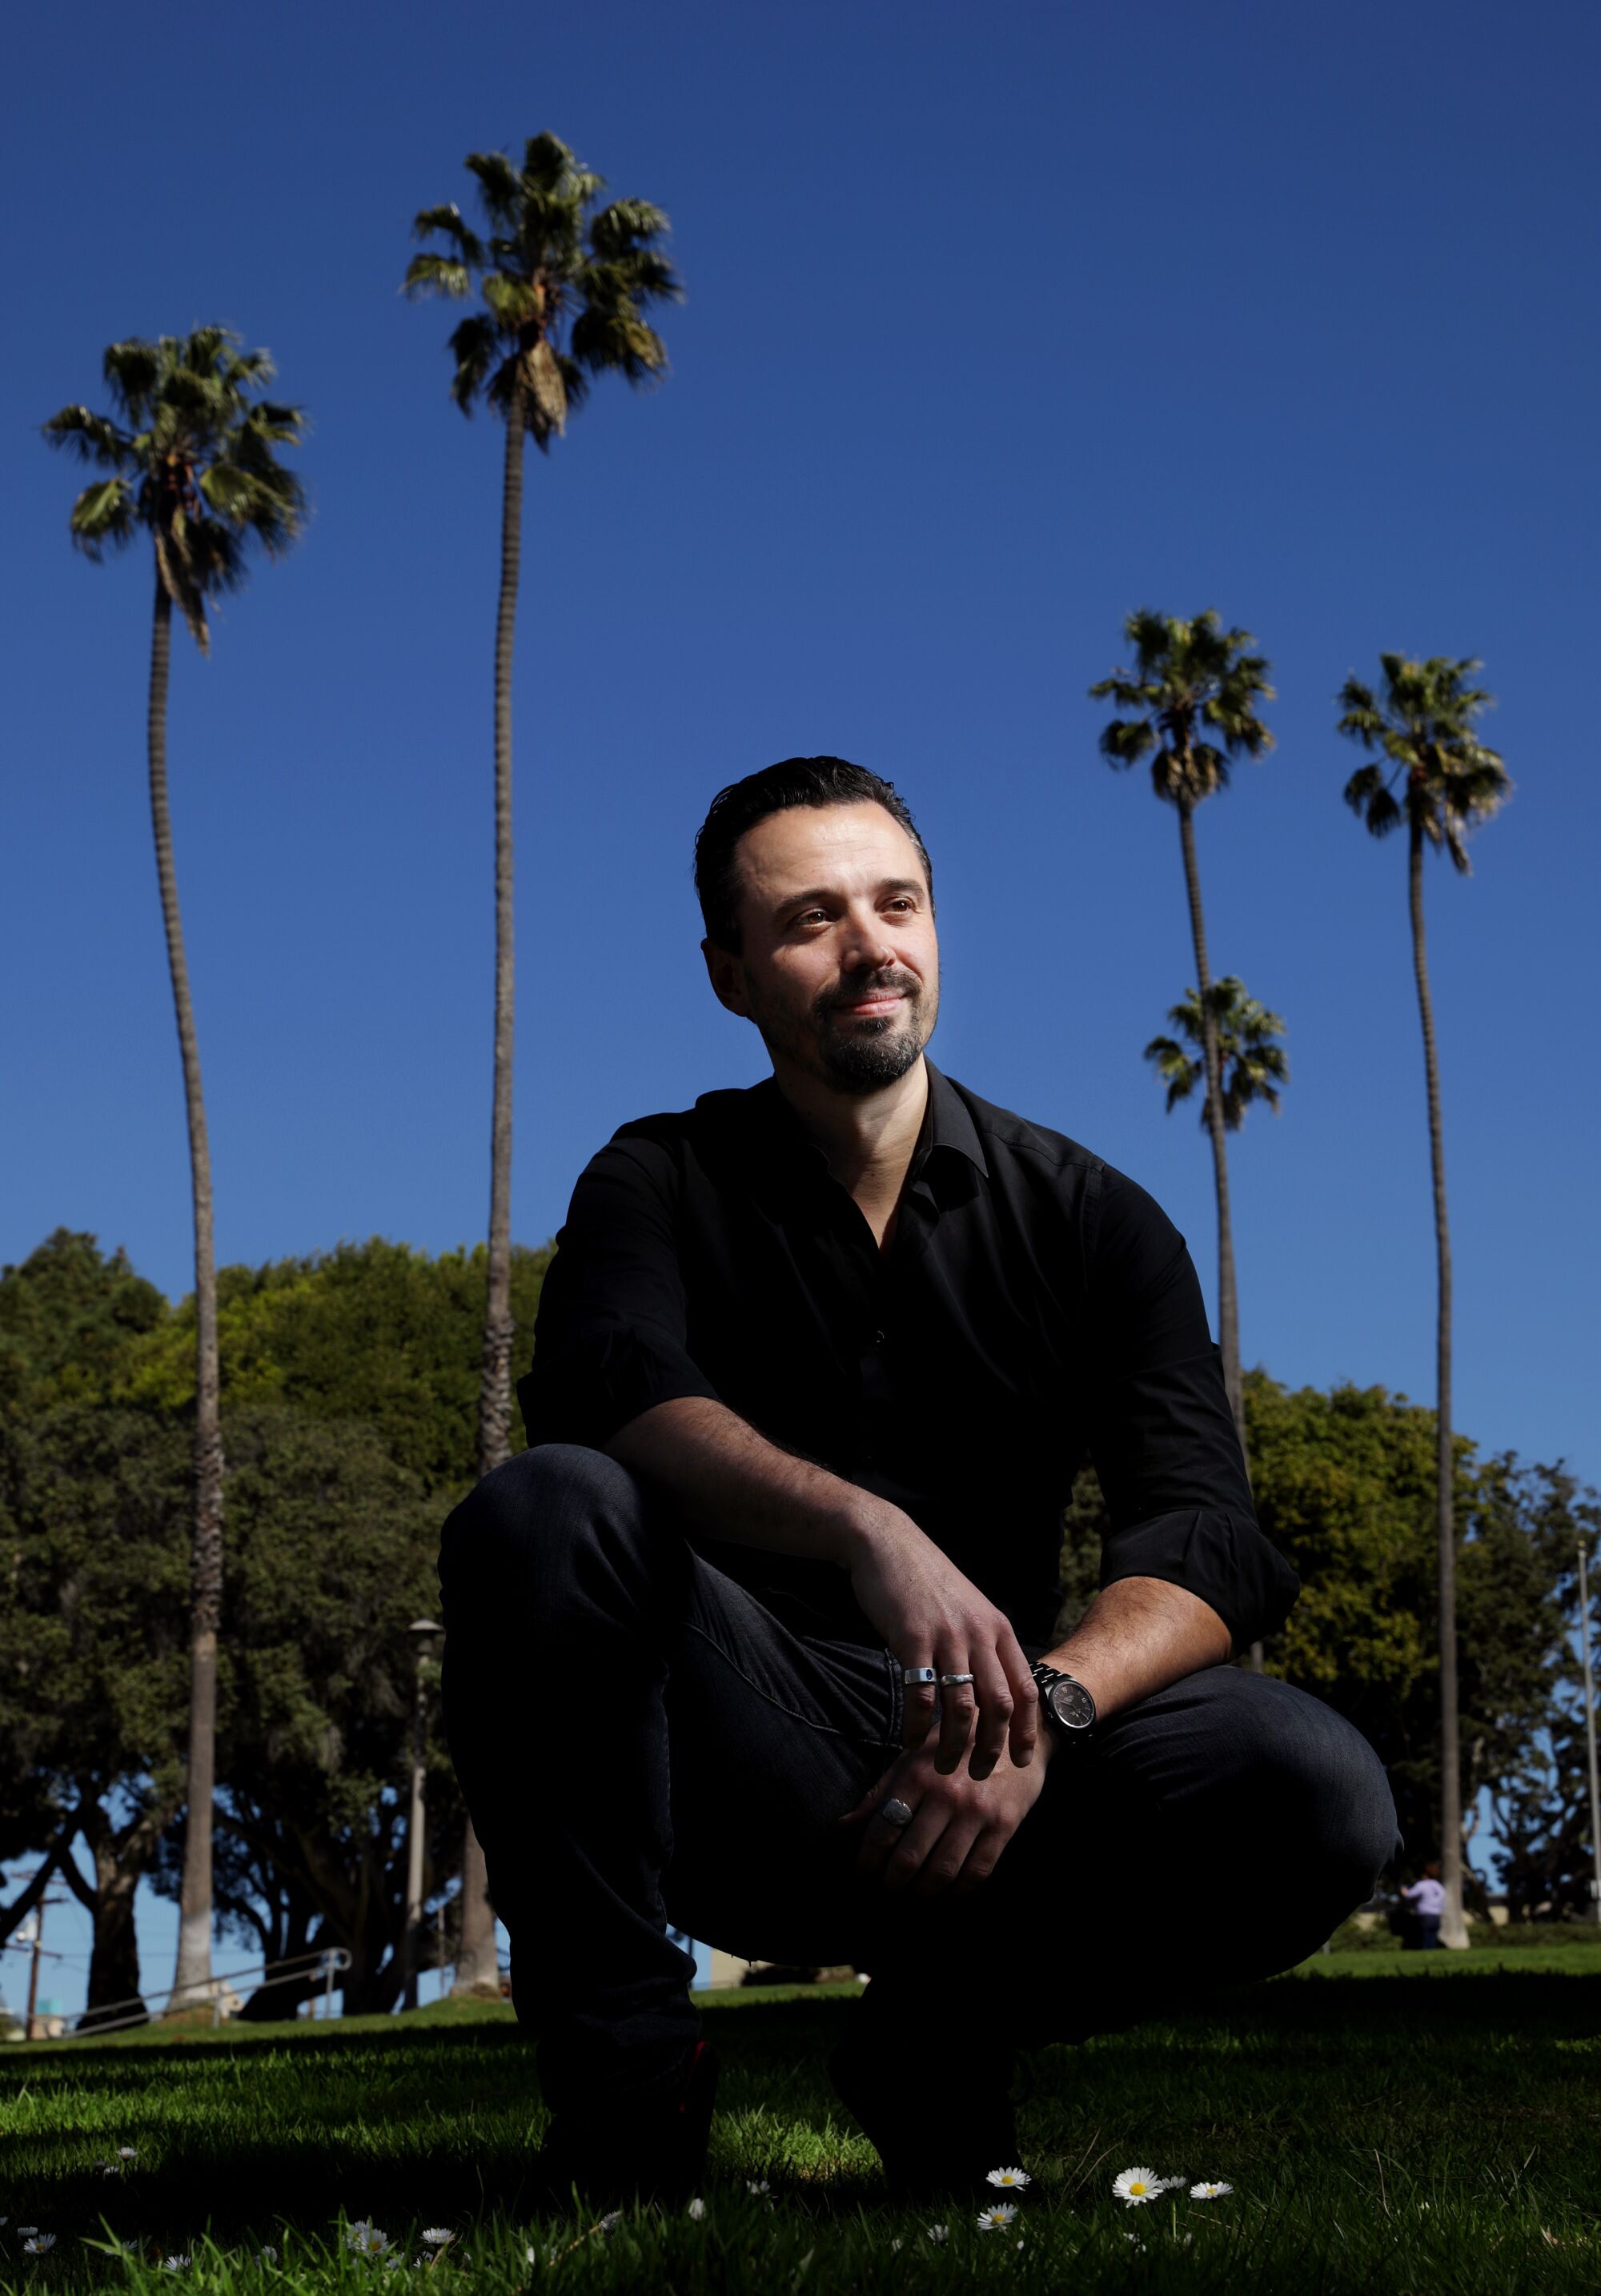 Benjamin Colussi, the choreographer of the video game 'Sifu' is photographed in Santa Monica.